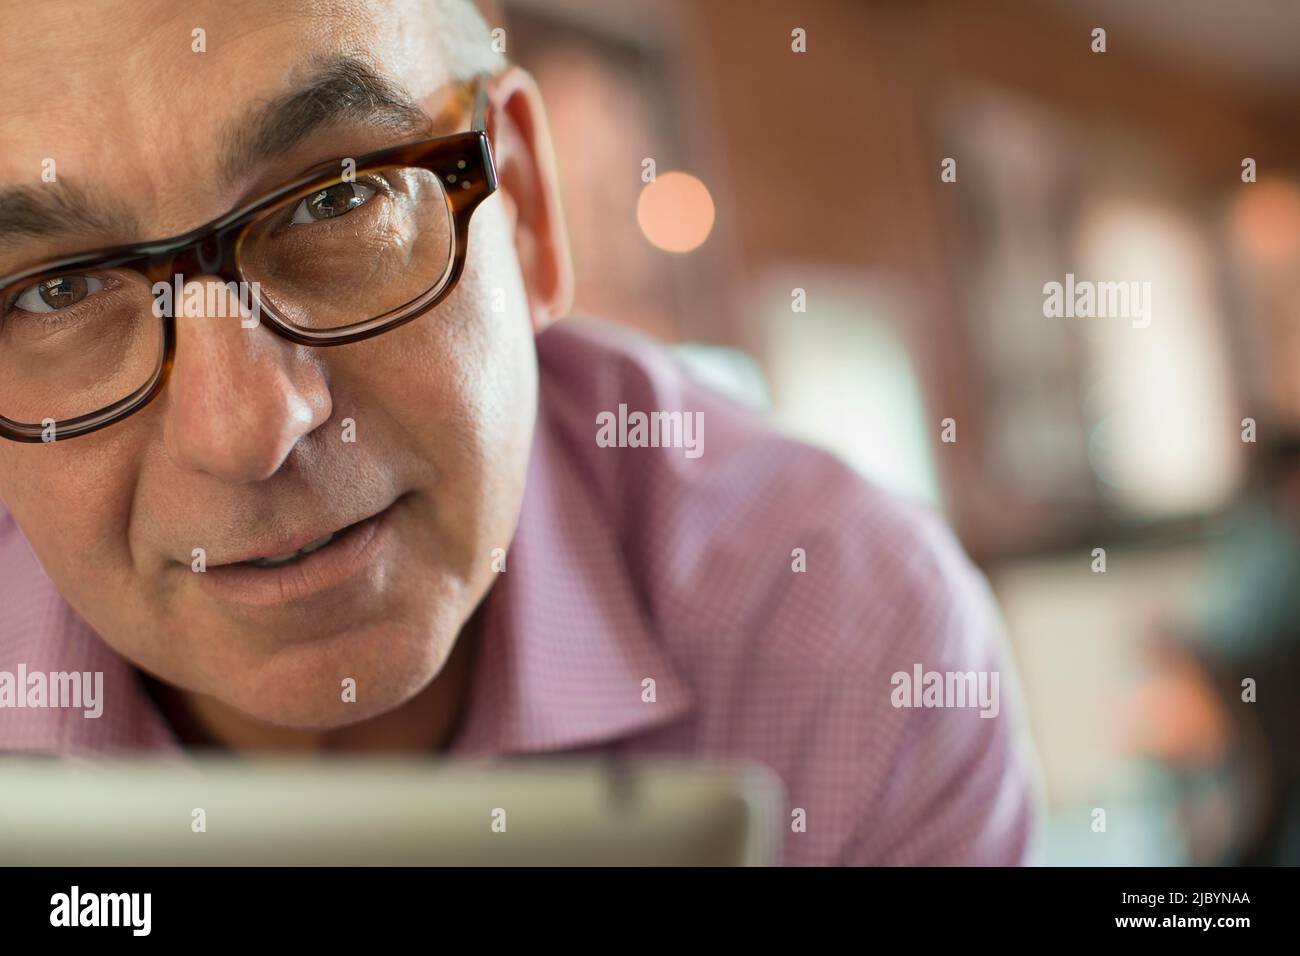 Close up of serious man wearing eyeglasses Banque D'Images